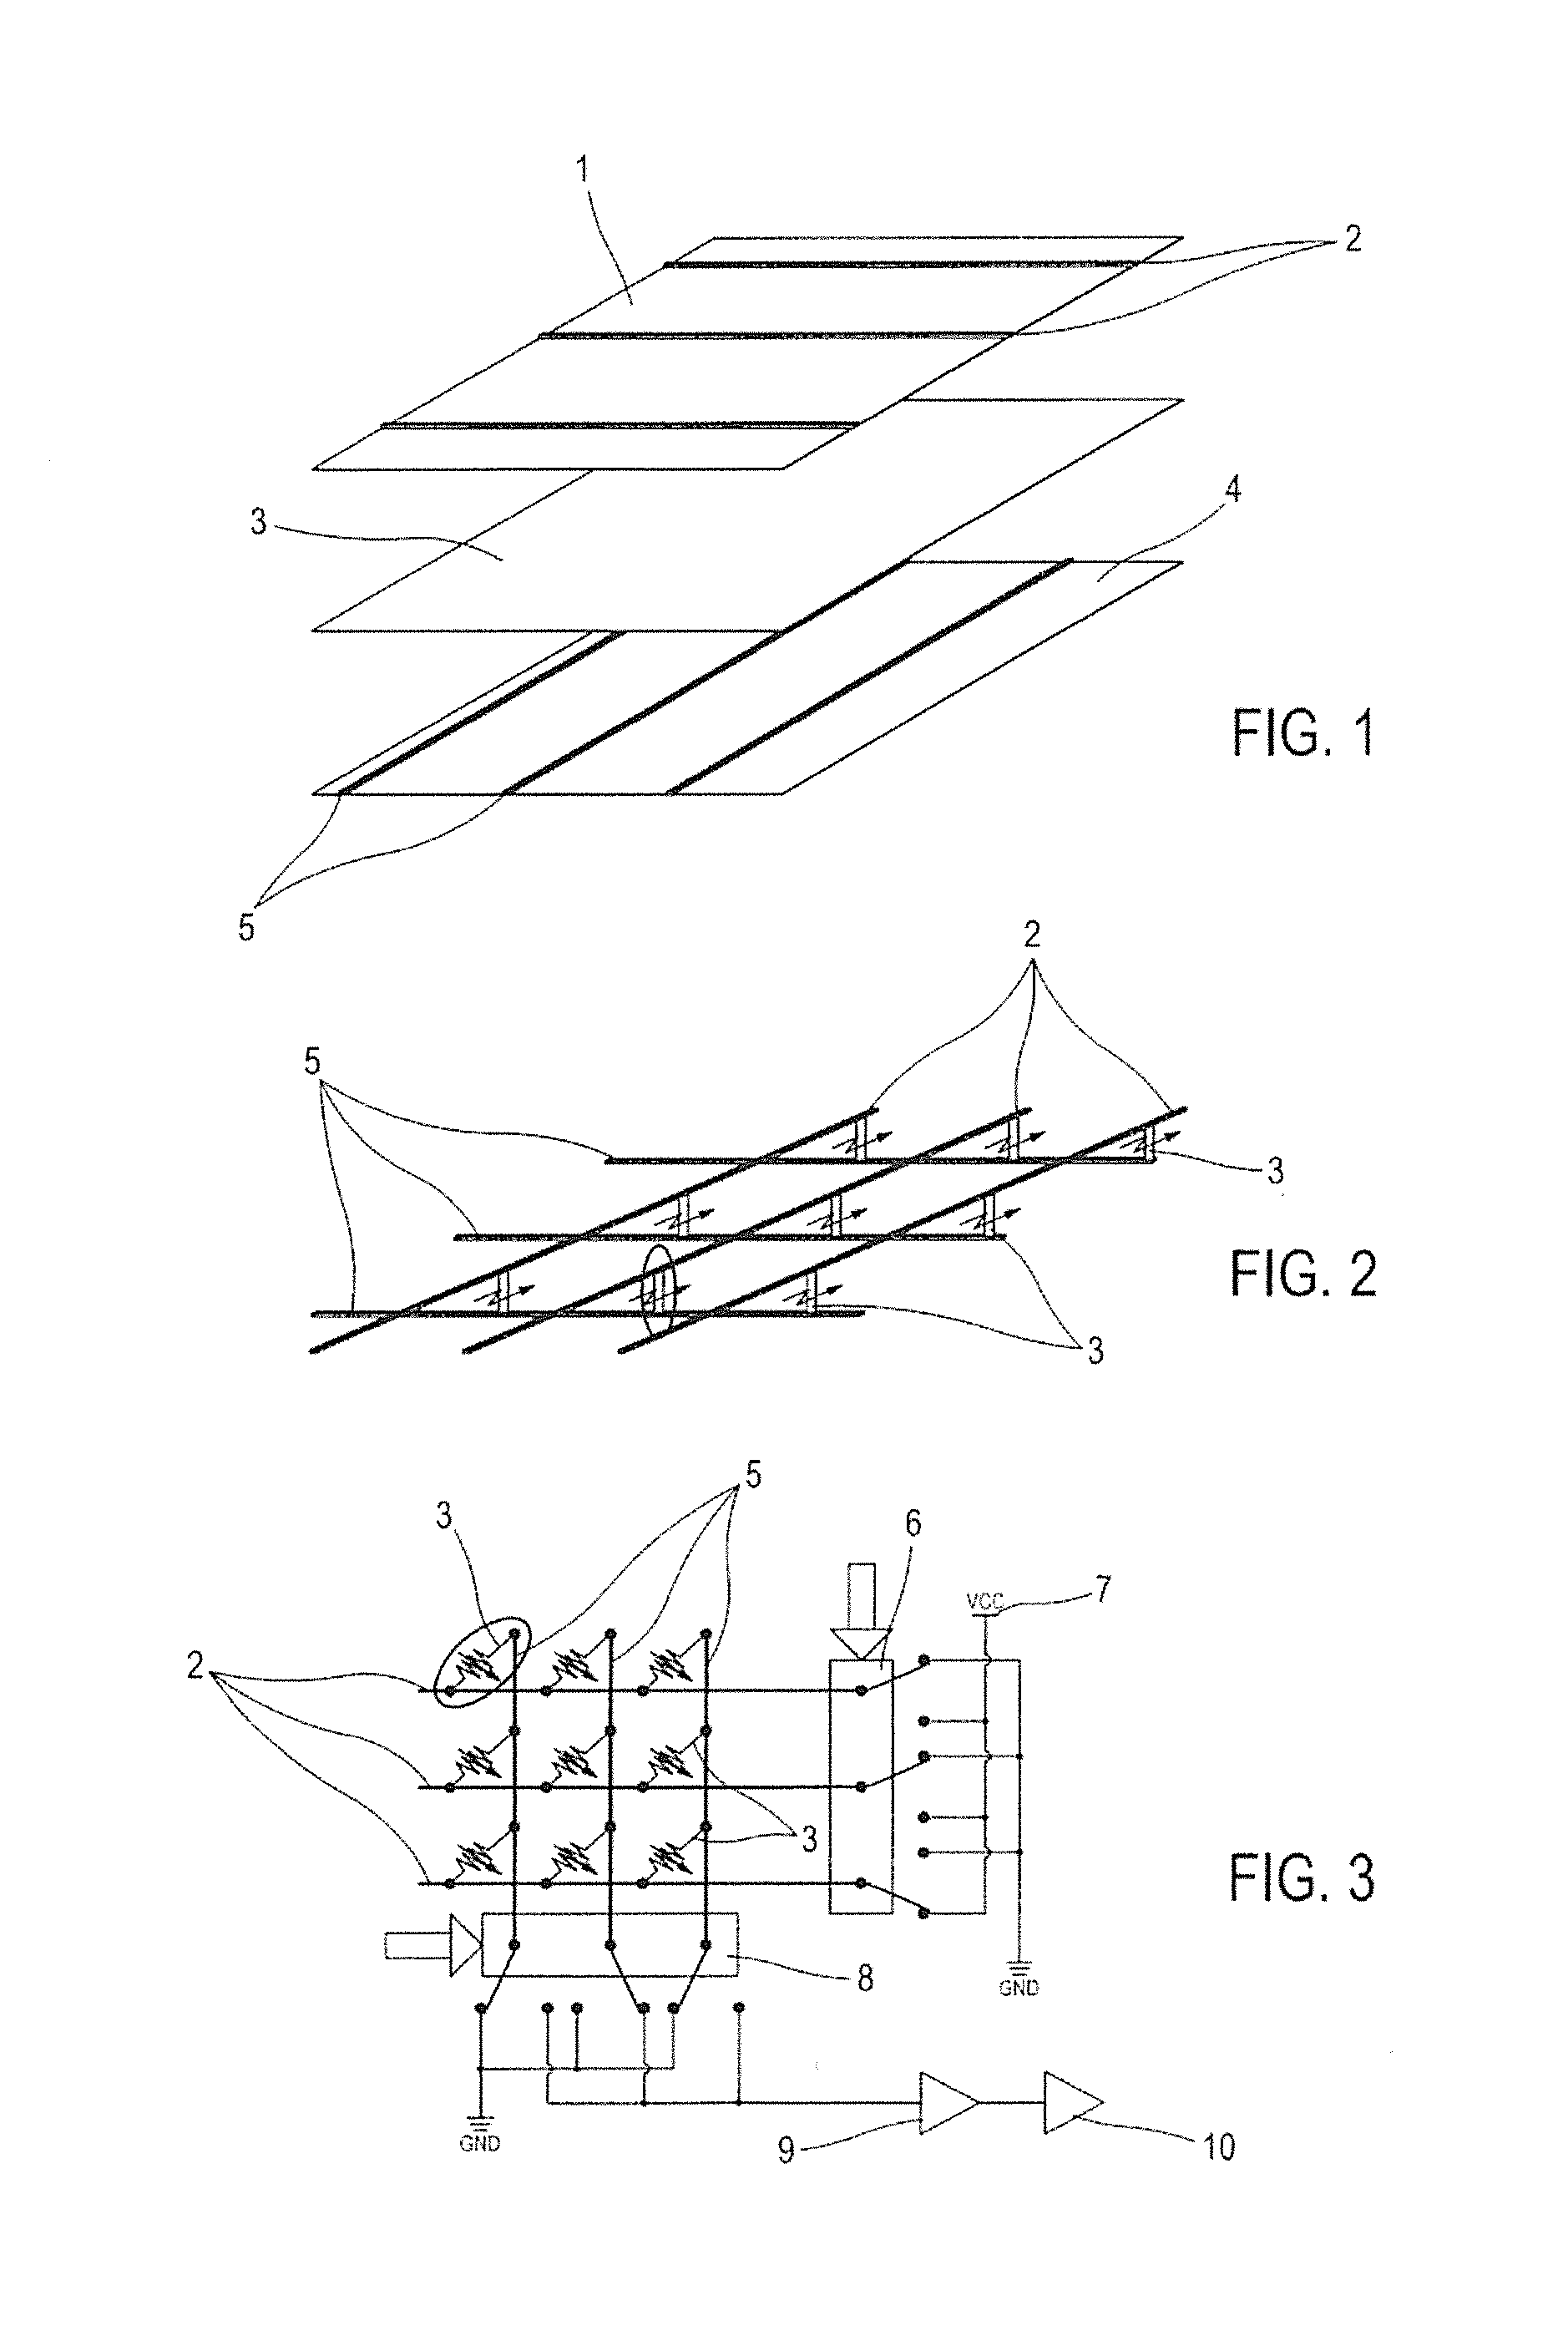 Device for Measuring Pressure from a Flexible, Pliable, and/or Extensible Object Made from a Textile Material Comprising a Measurement Device